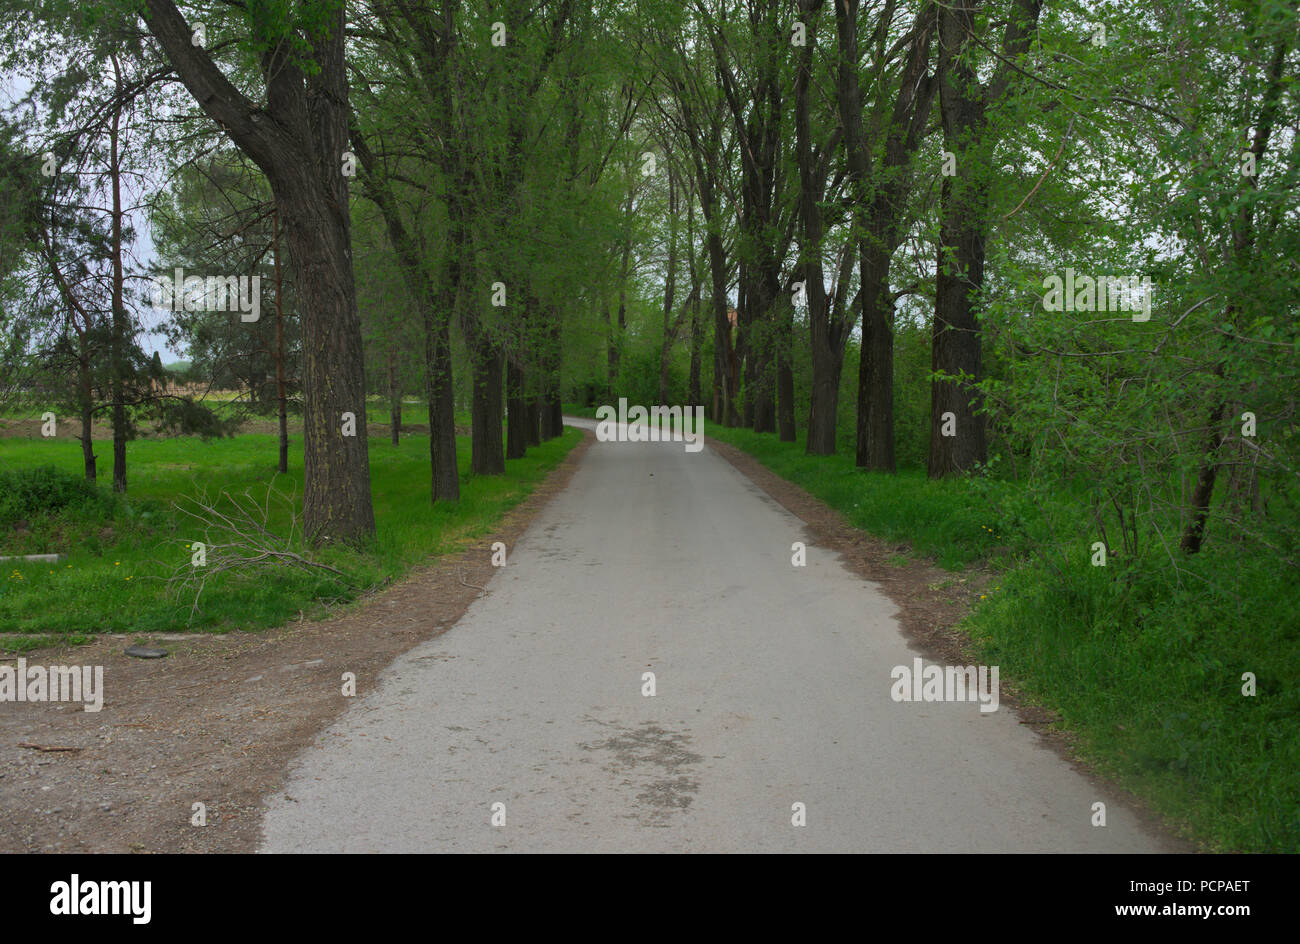 Countryside asphalt road surrounded with trees, springtime Stock Photo